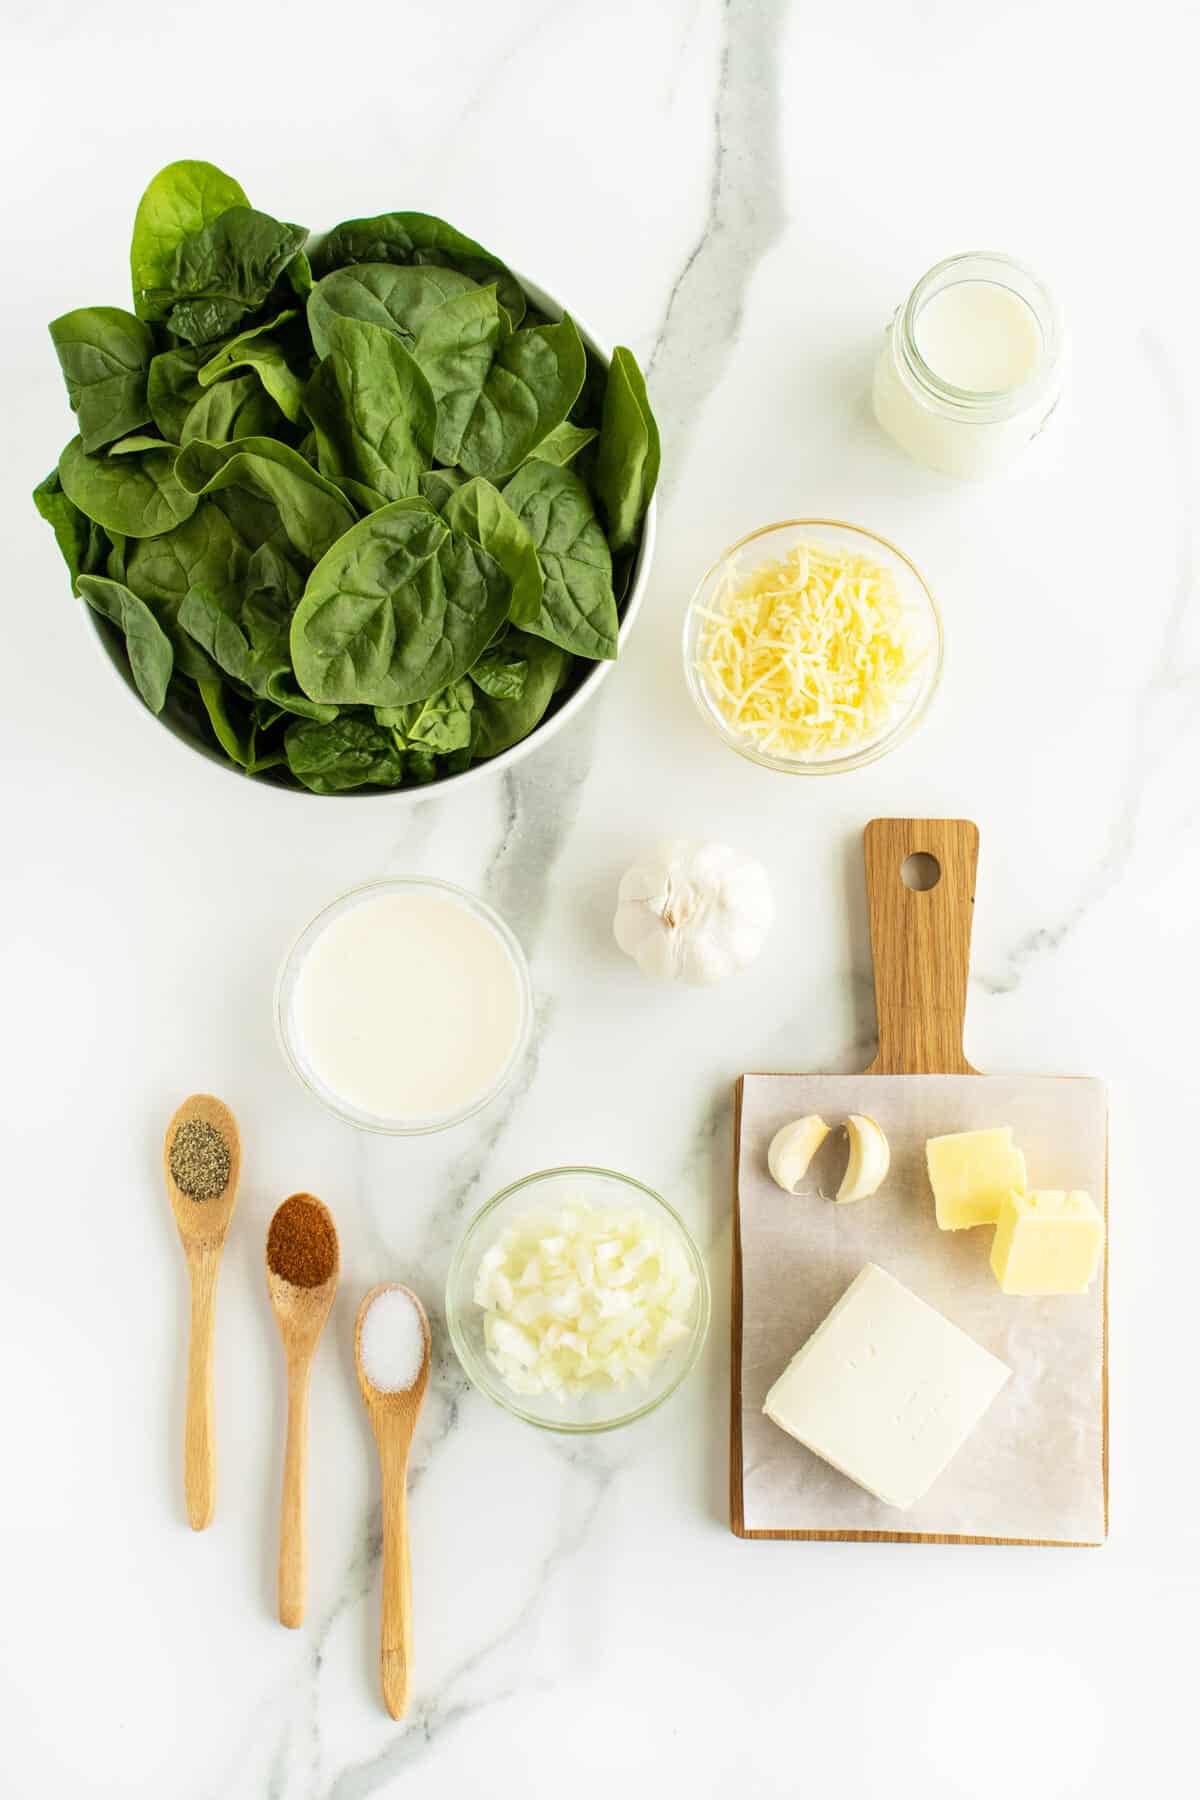 Creamed spinach ingredients